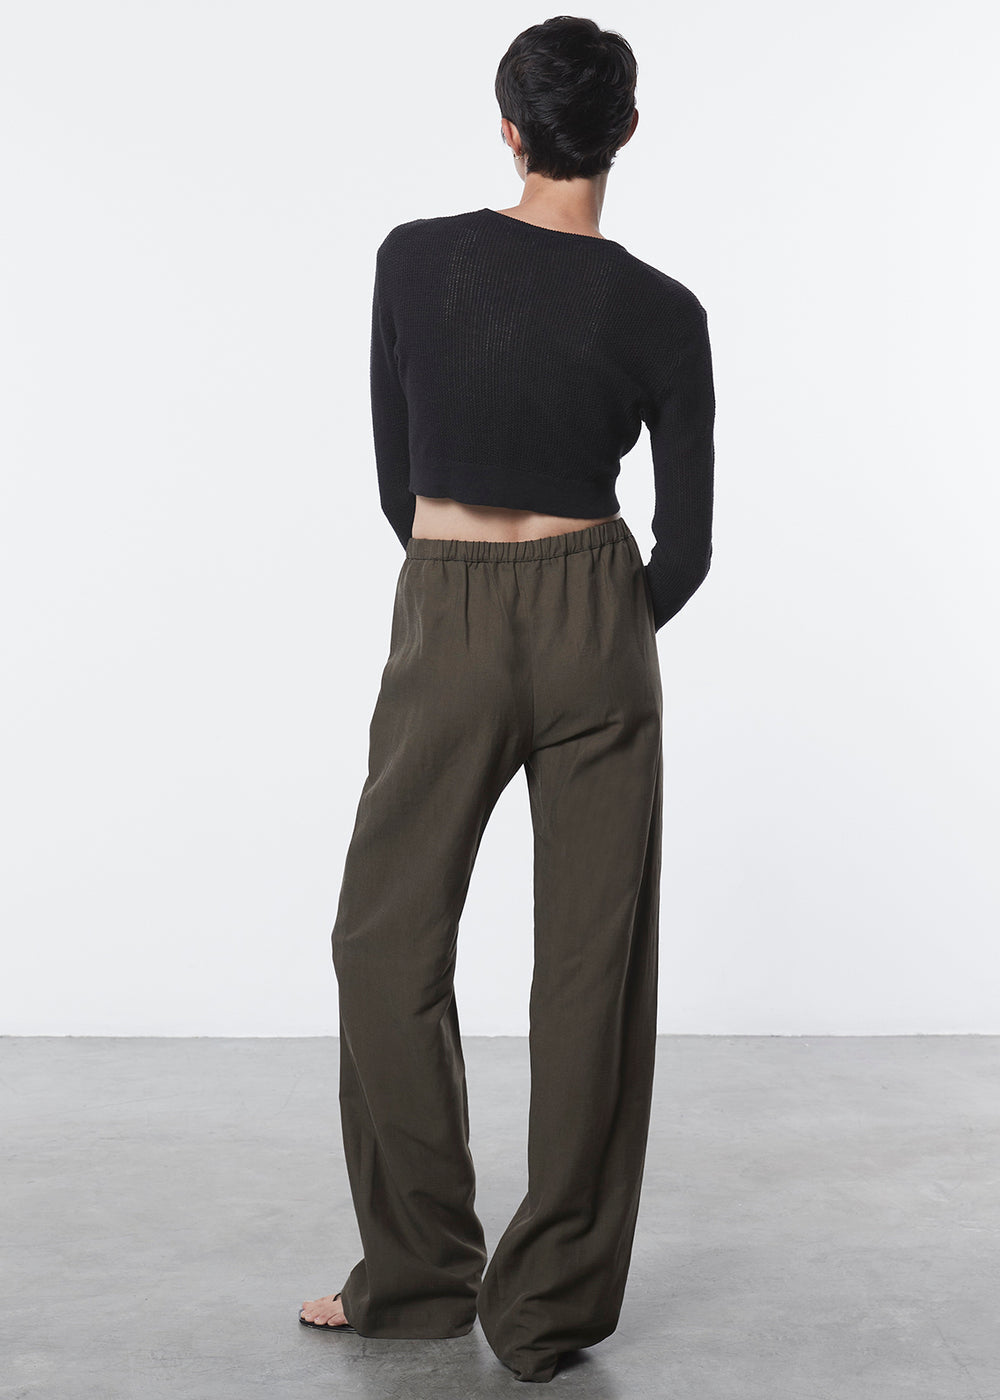 Enza Costa - Women - Military Twill Everywhere Pant